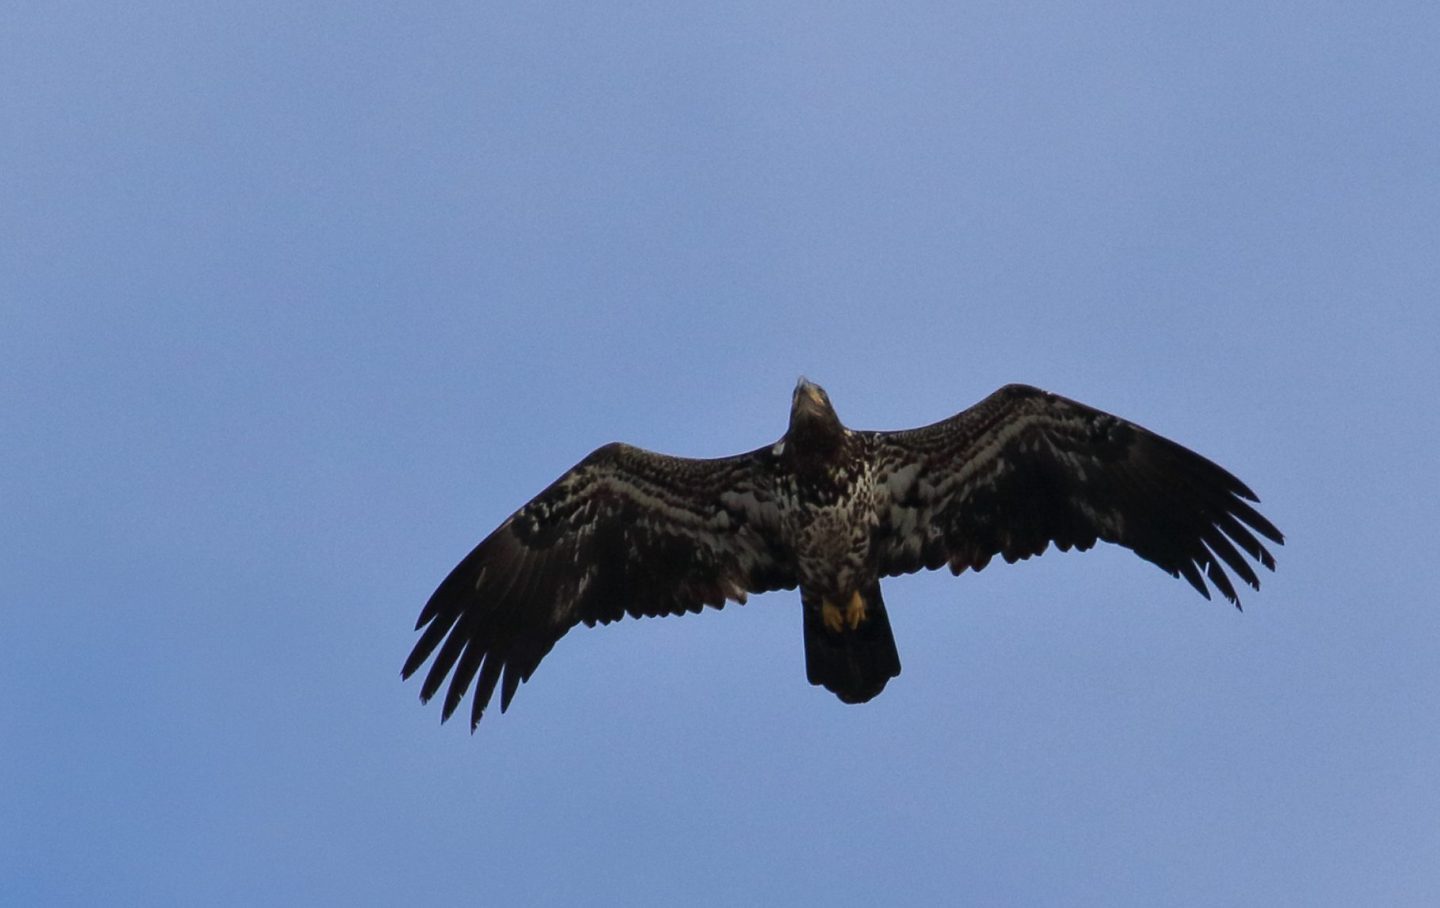 Juvenile eagle, photo by Kimberle Stark: a young eagle viewed from below, soaring in the sky with a blue-gray background.